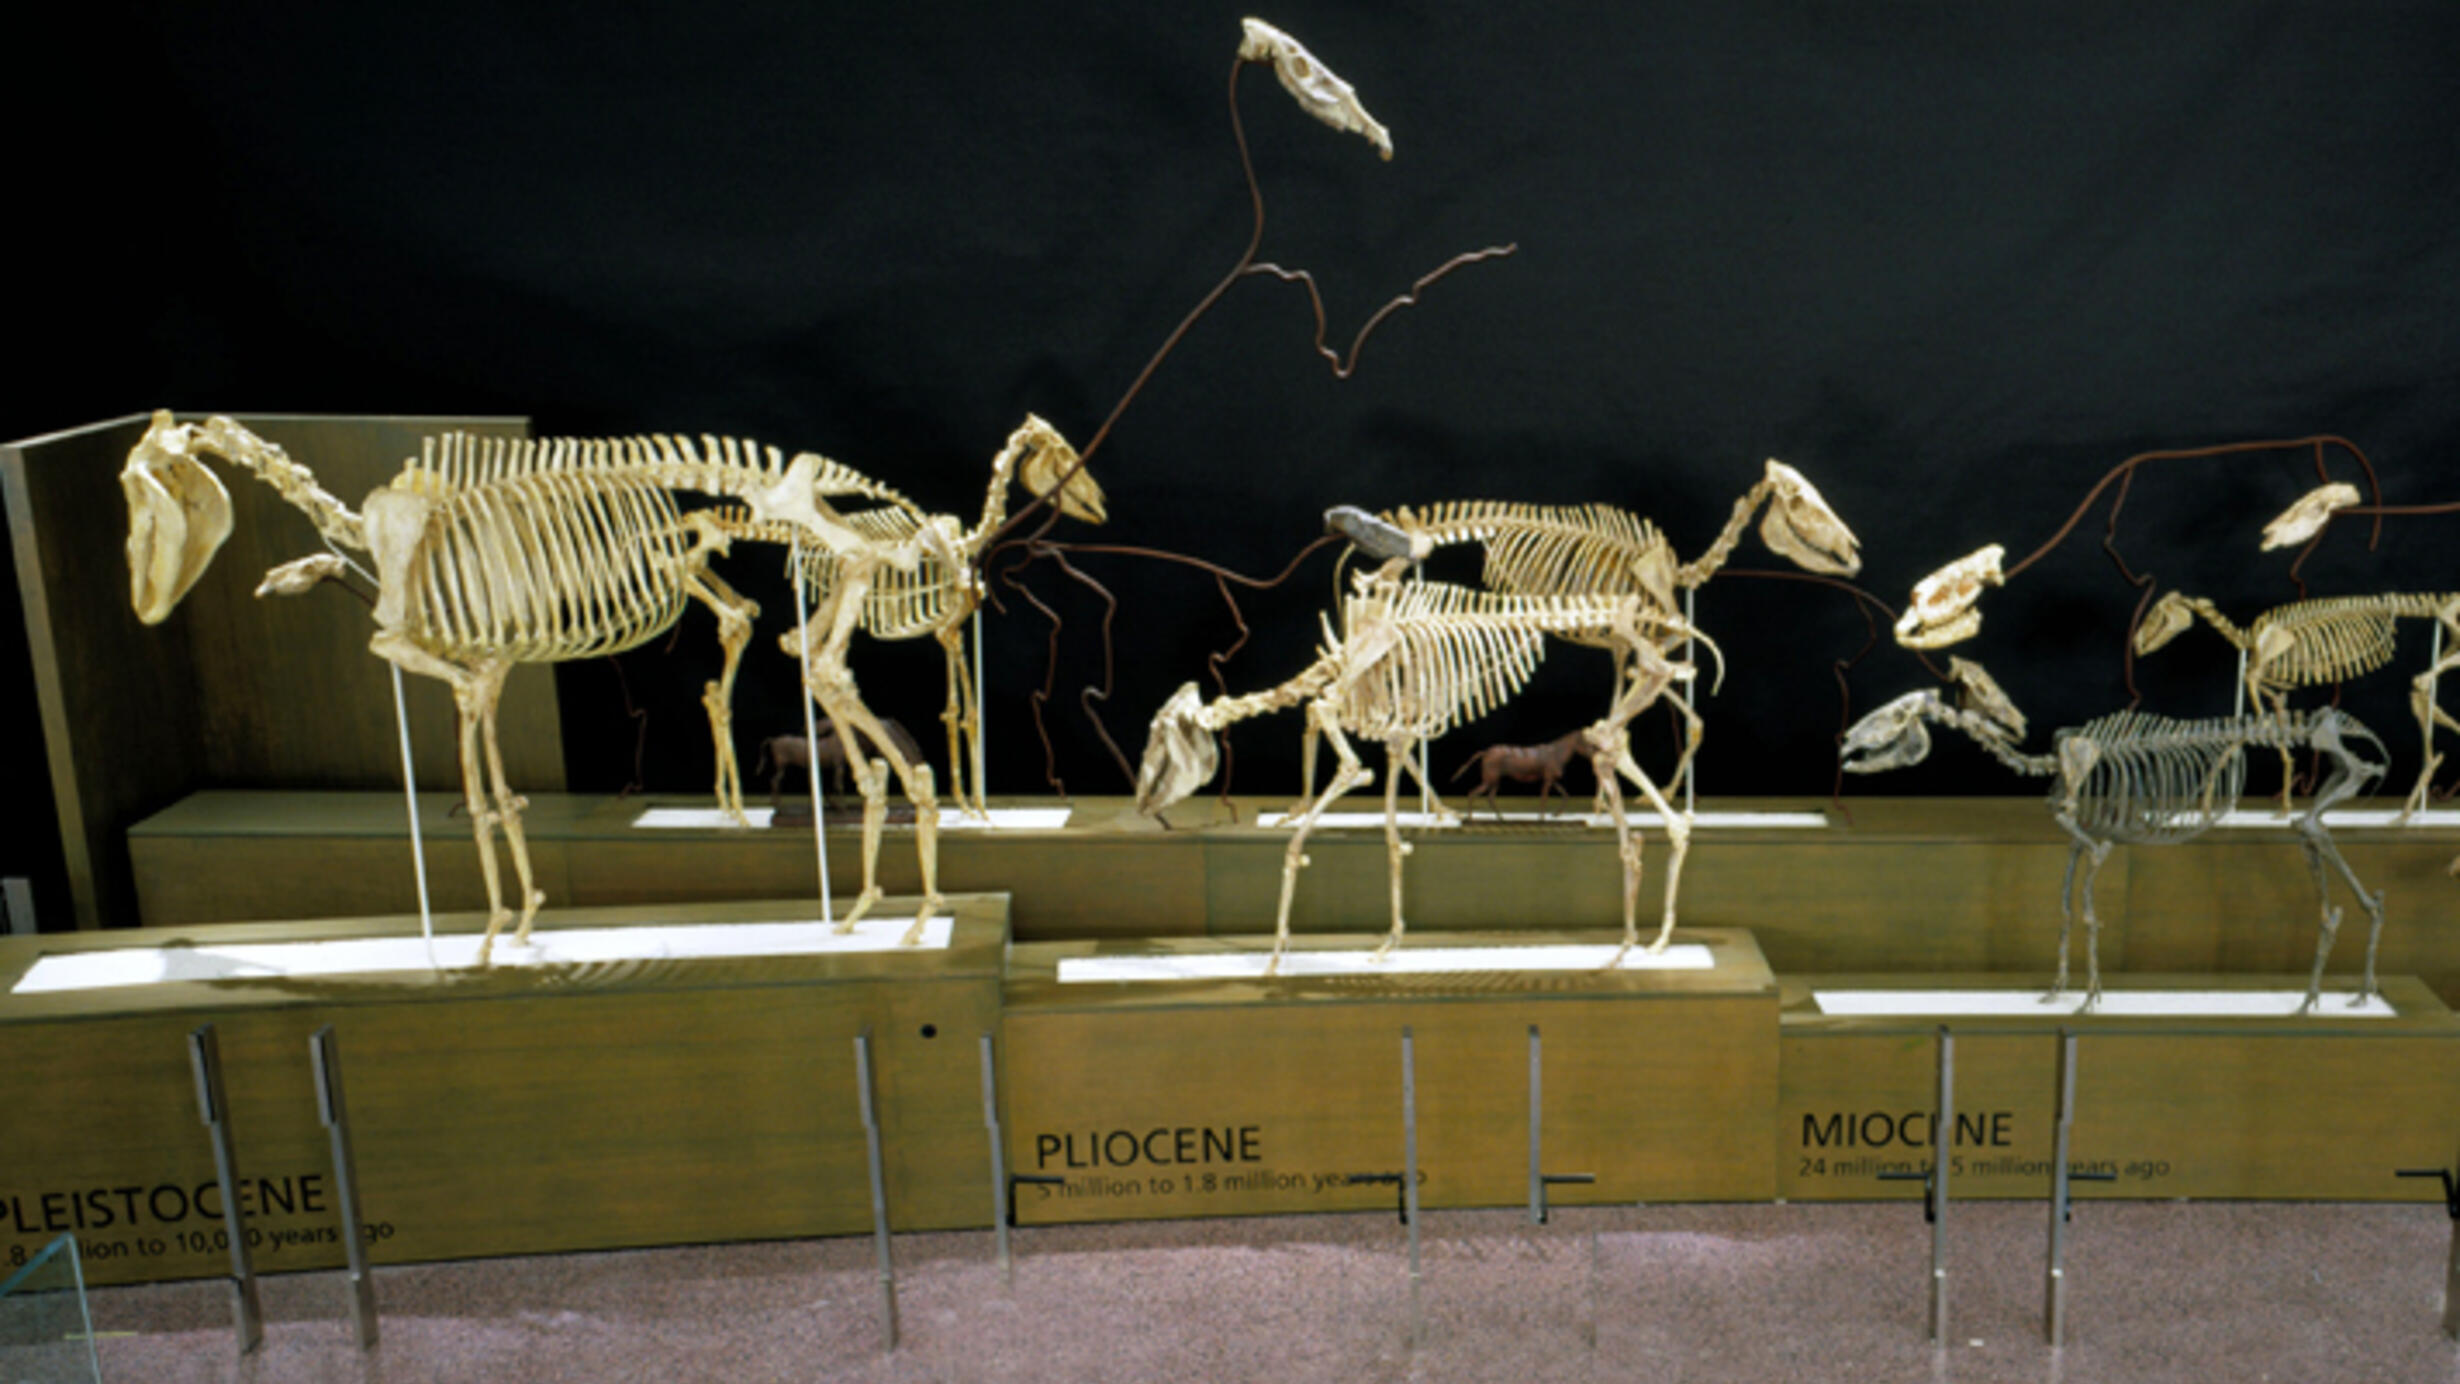 Exhibition of fossil horse skeletons in the Museum's Hall of Advanced Mammals. Most are complete; several have only a skull attached to a wire frame representing the skeleton.